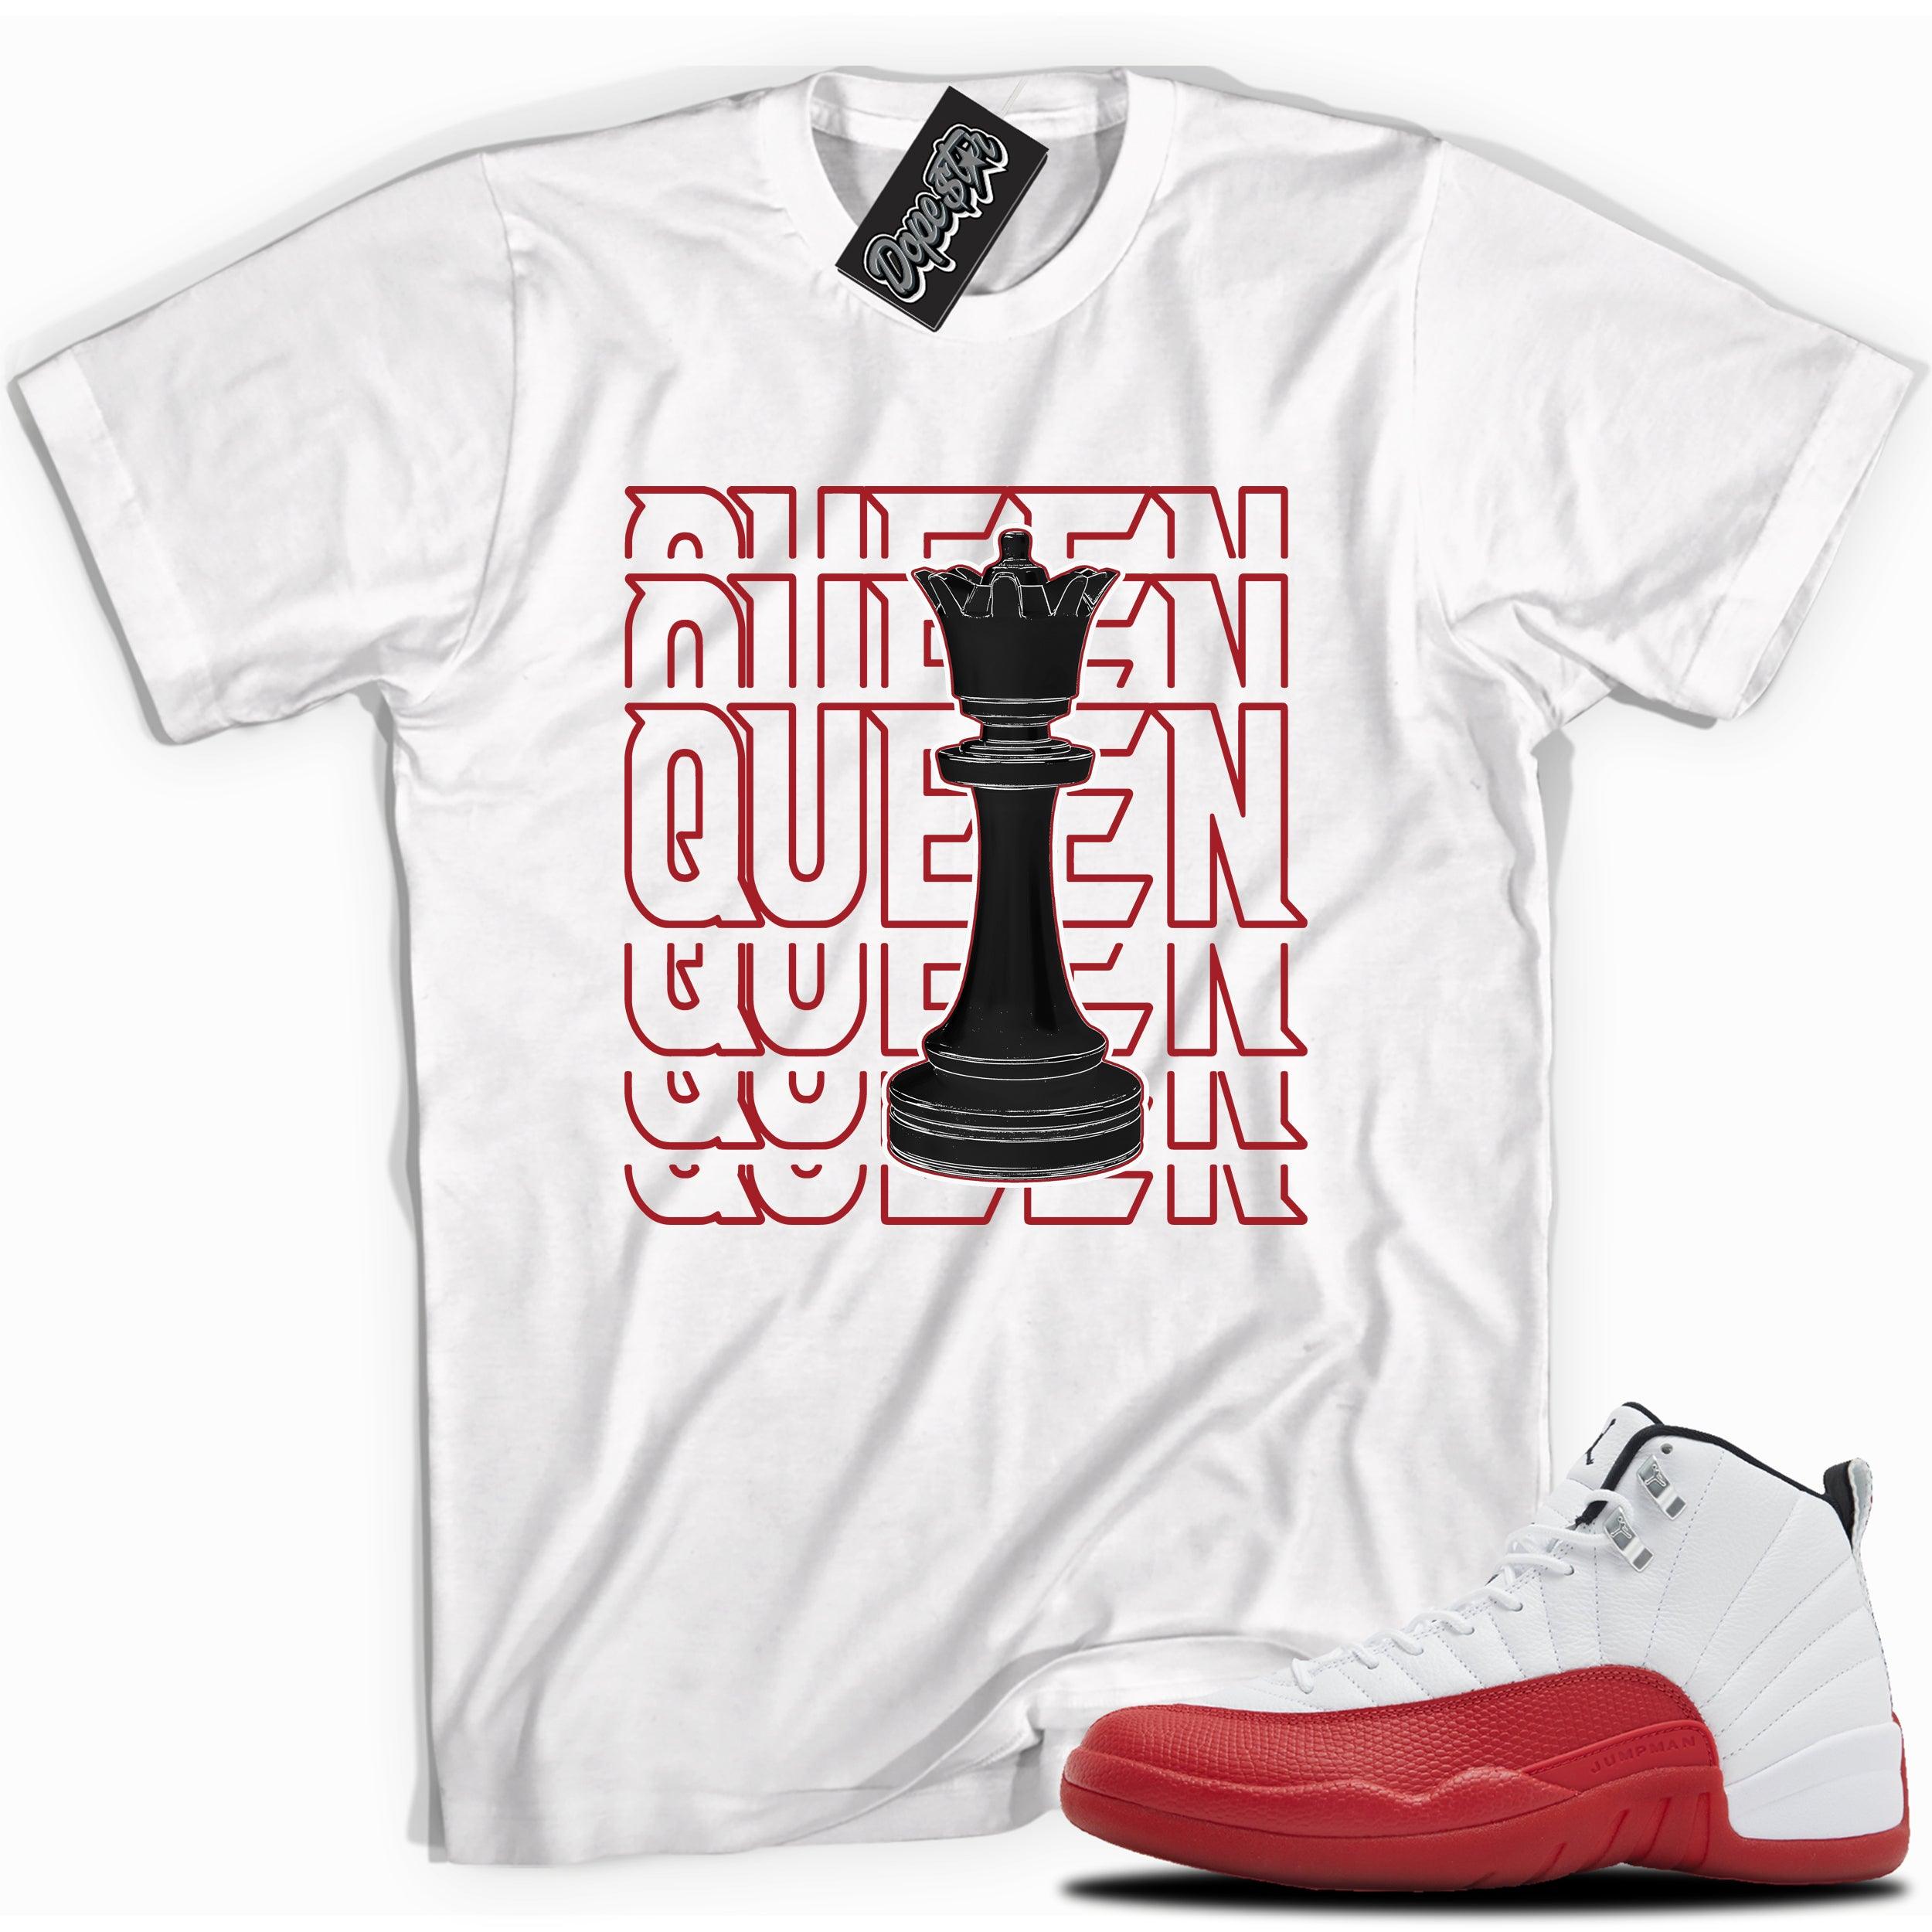 Cool White graphic tee with “QUEEN” print, that perfectly matches Air Jordan 12 Retro Cherry Red 2023 red and white sneakers